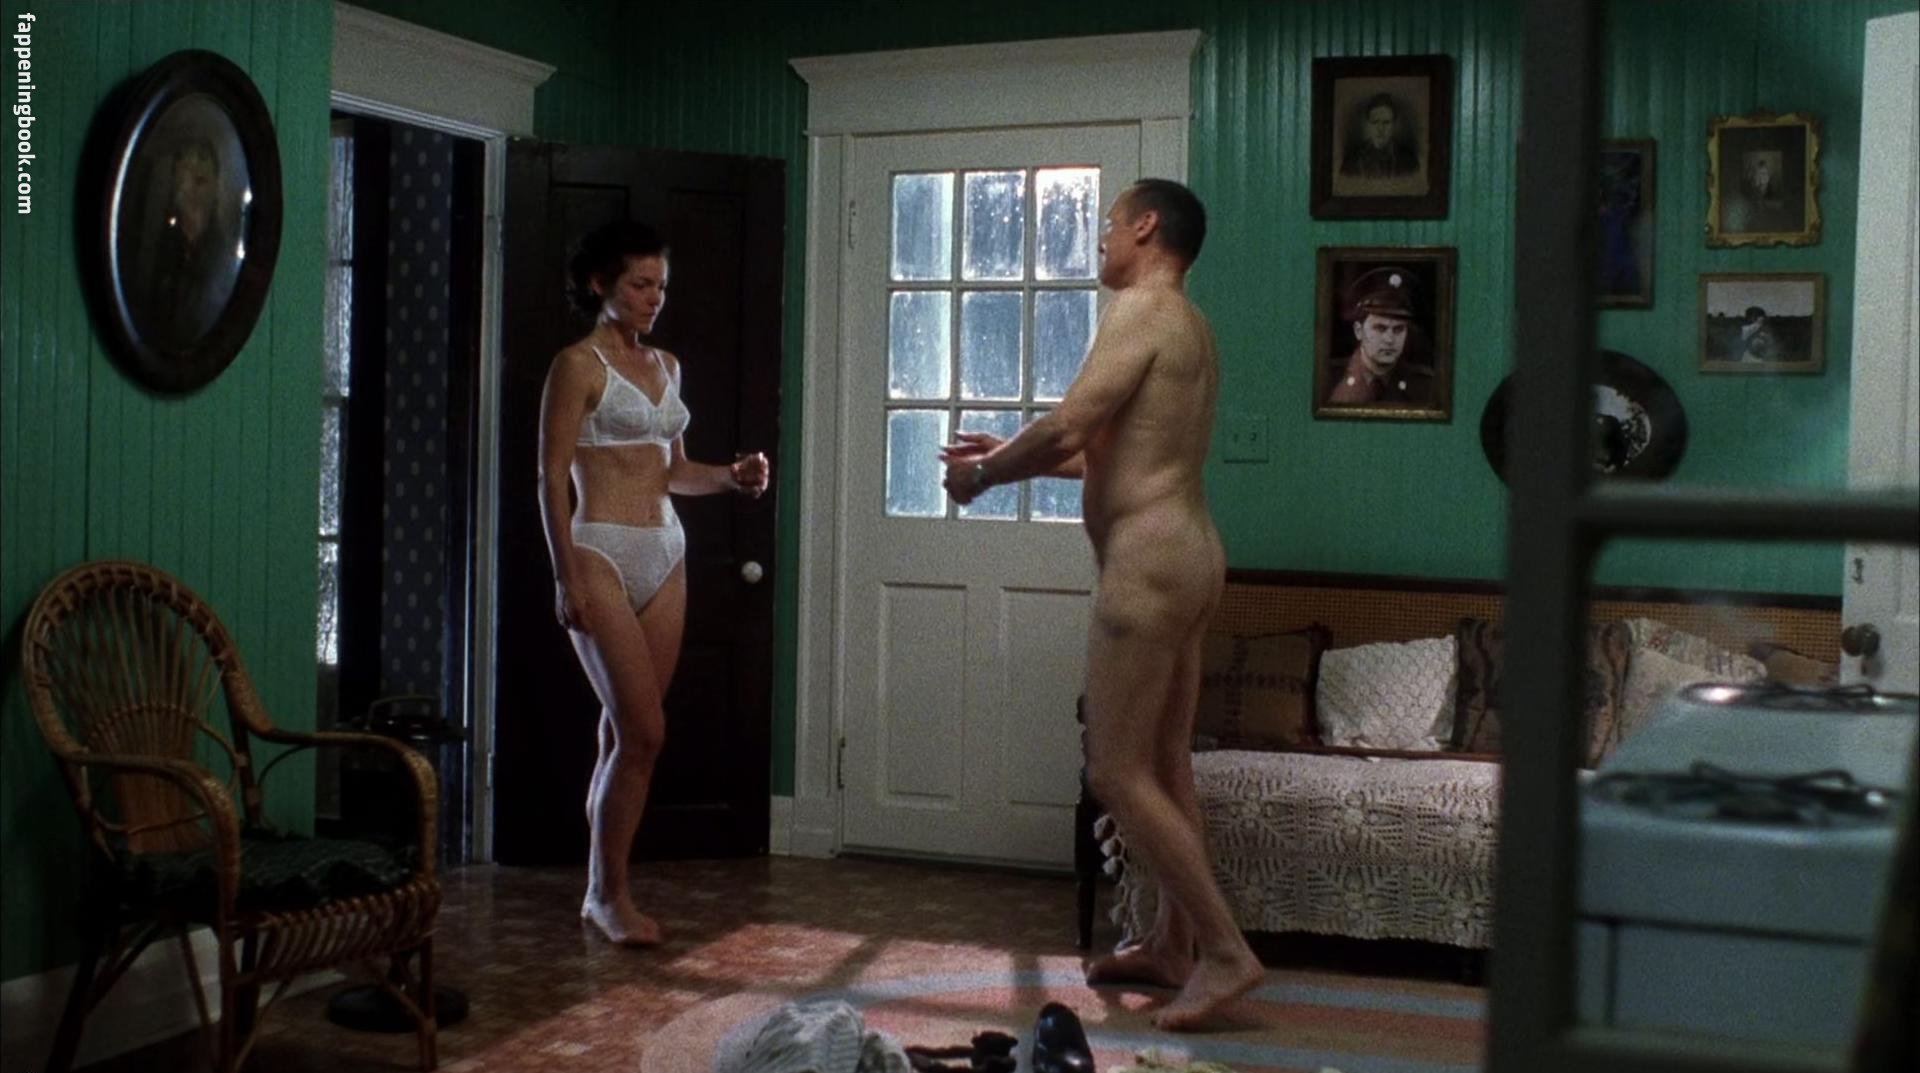 Amy Irving Nude, The Fappening - Photo #30219 - FappeningBook.